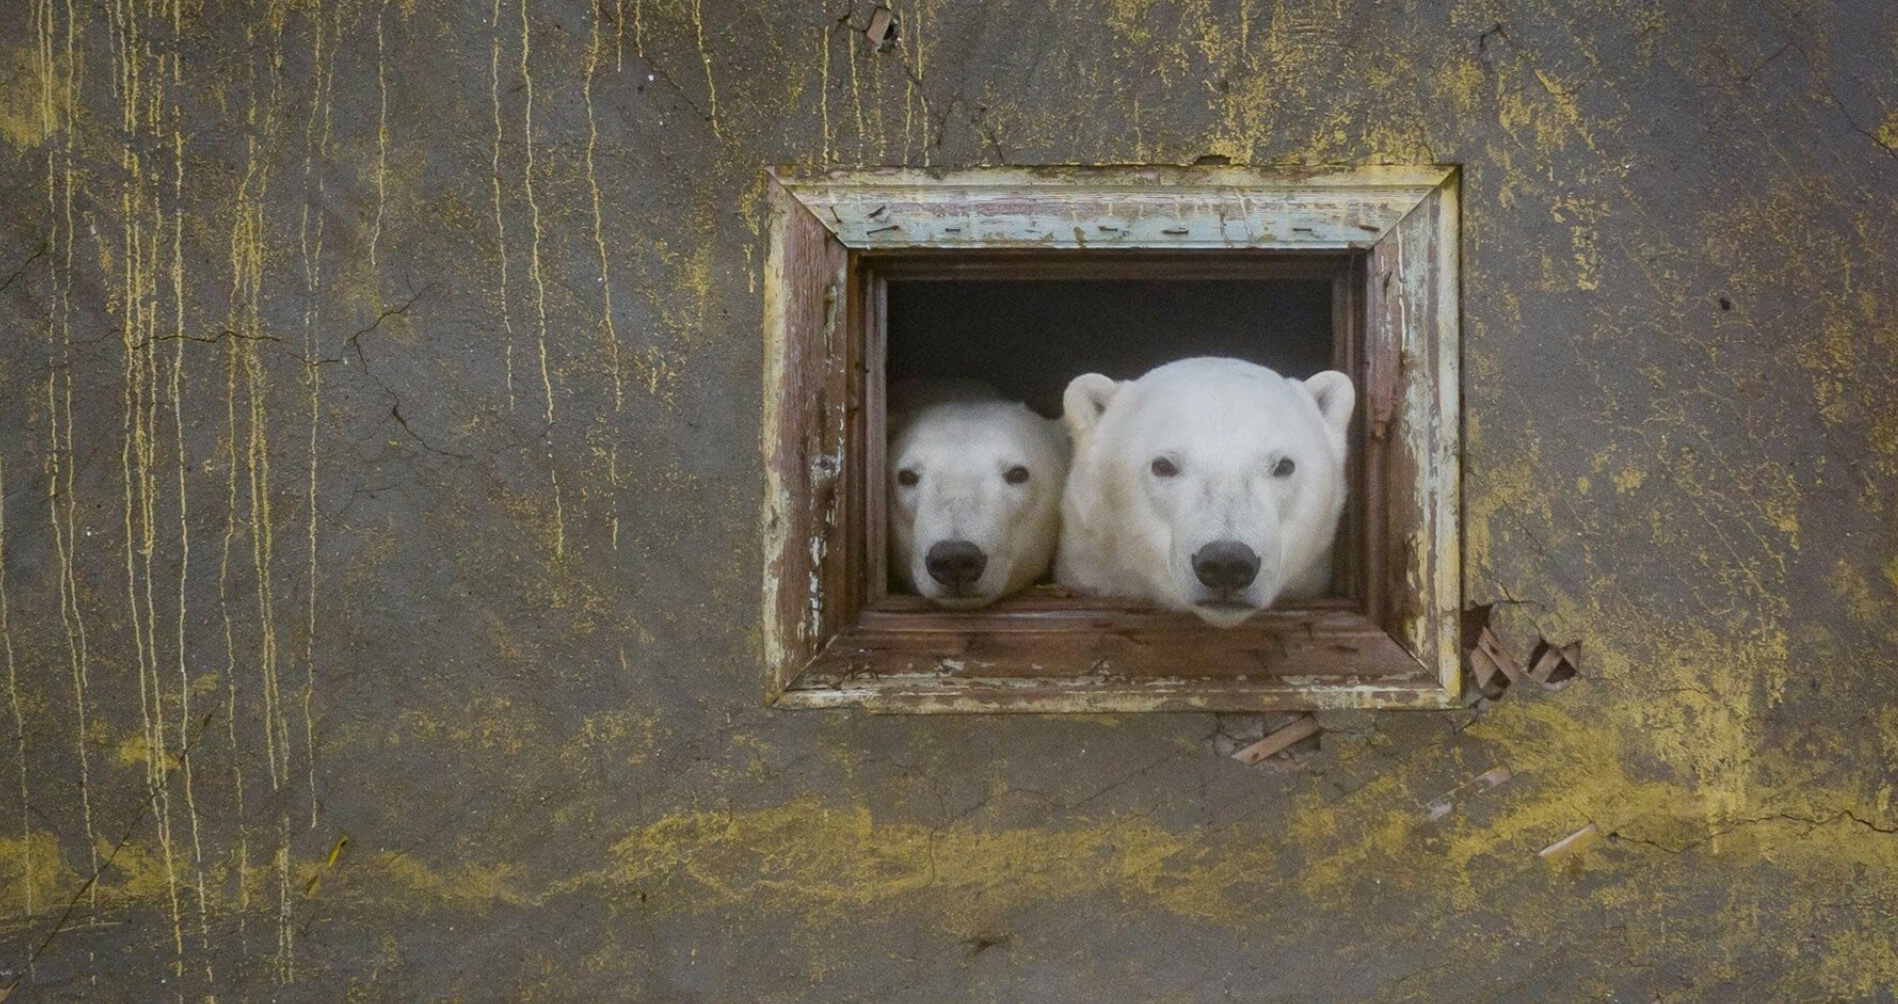 dmitry kokh photographs polar bears occupying an abandoned russian weather station